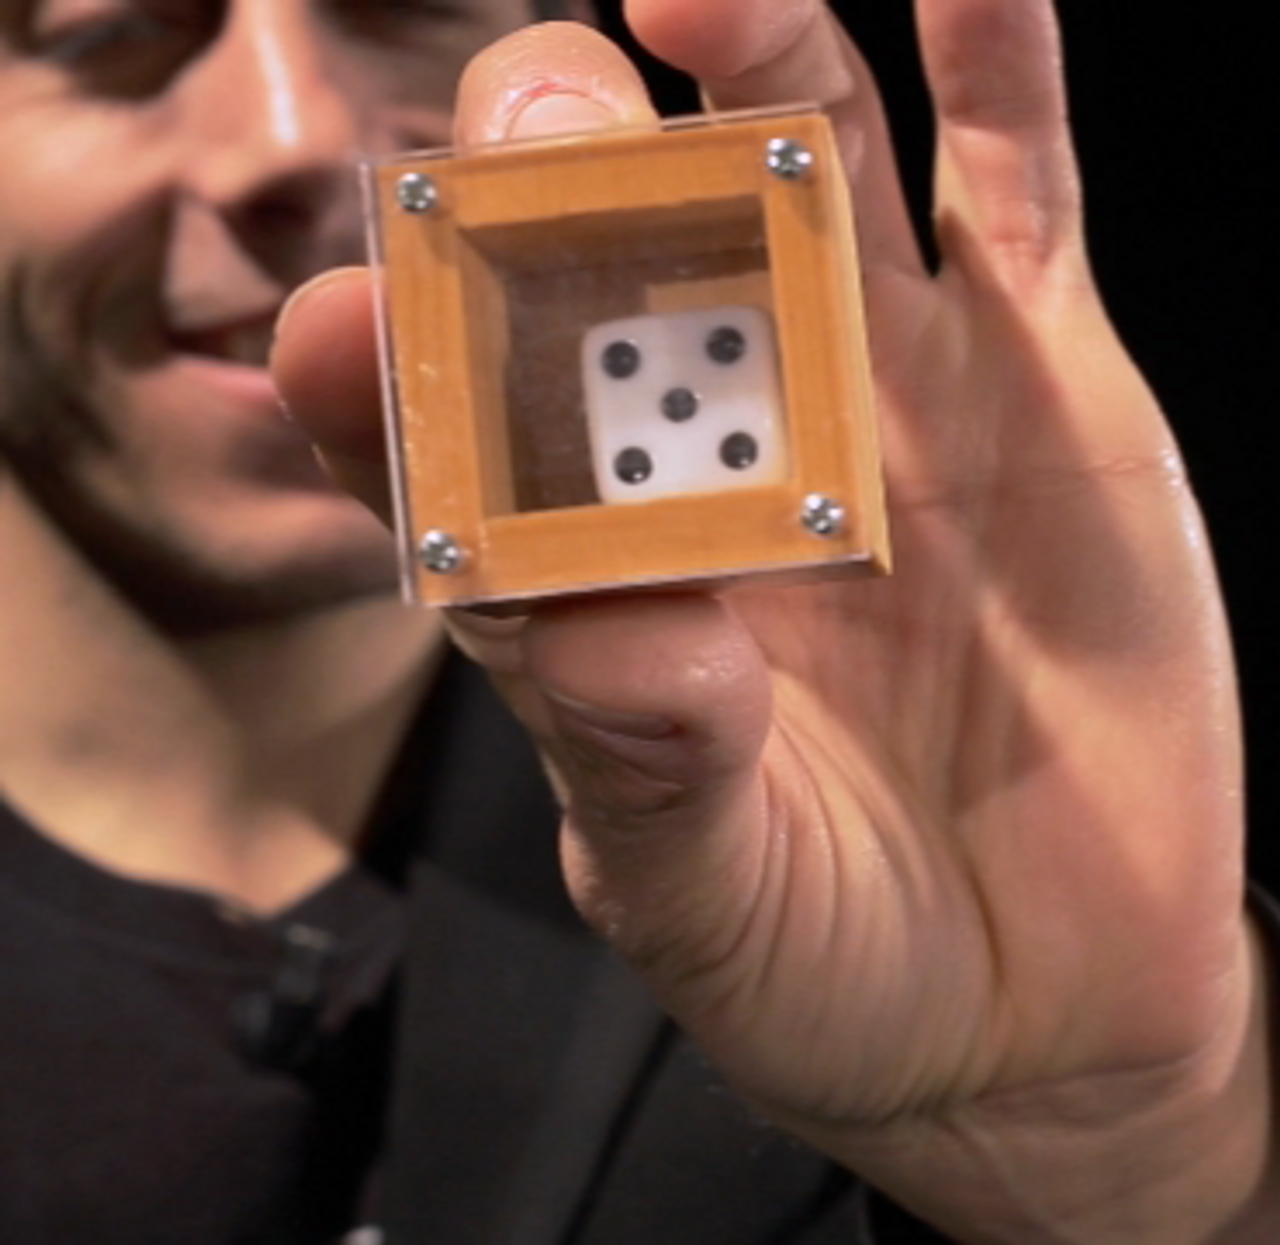 The Impossible Die - (Badlands Bob) - Only You Can Make the Die Sealed Inside the Box Turn - Don't Gamble With Your Life 